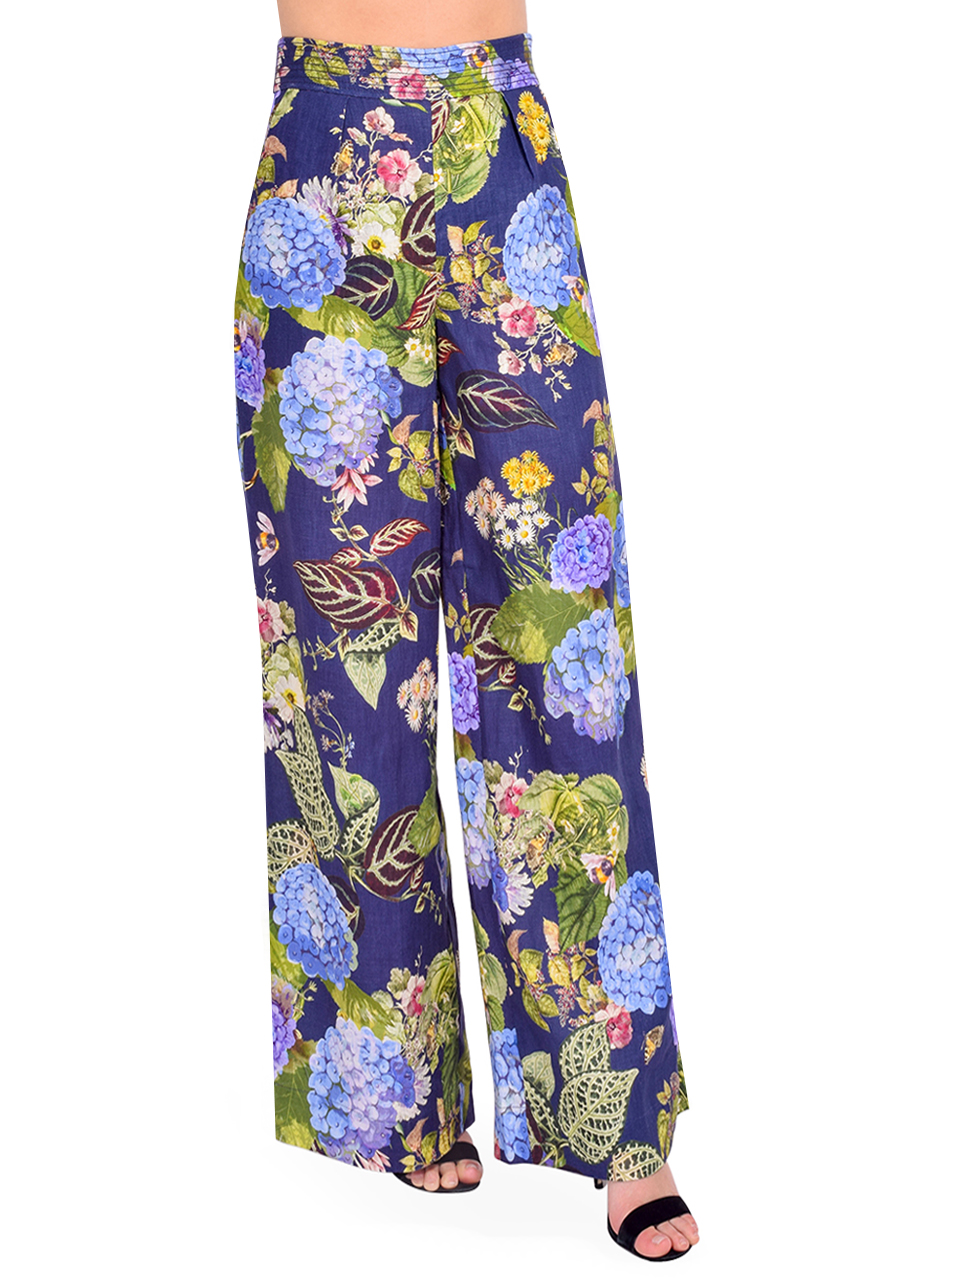 CARA CARA Josephine Pant in Floral Evening Blue Side View 